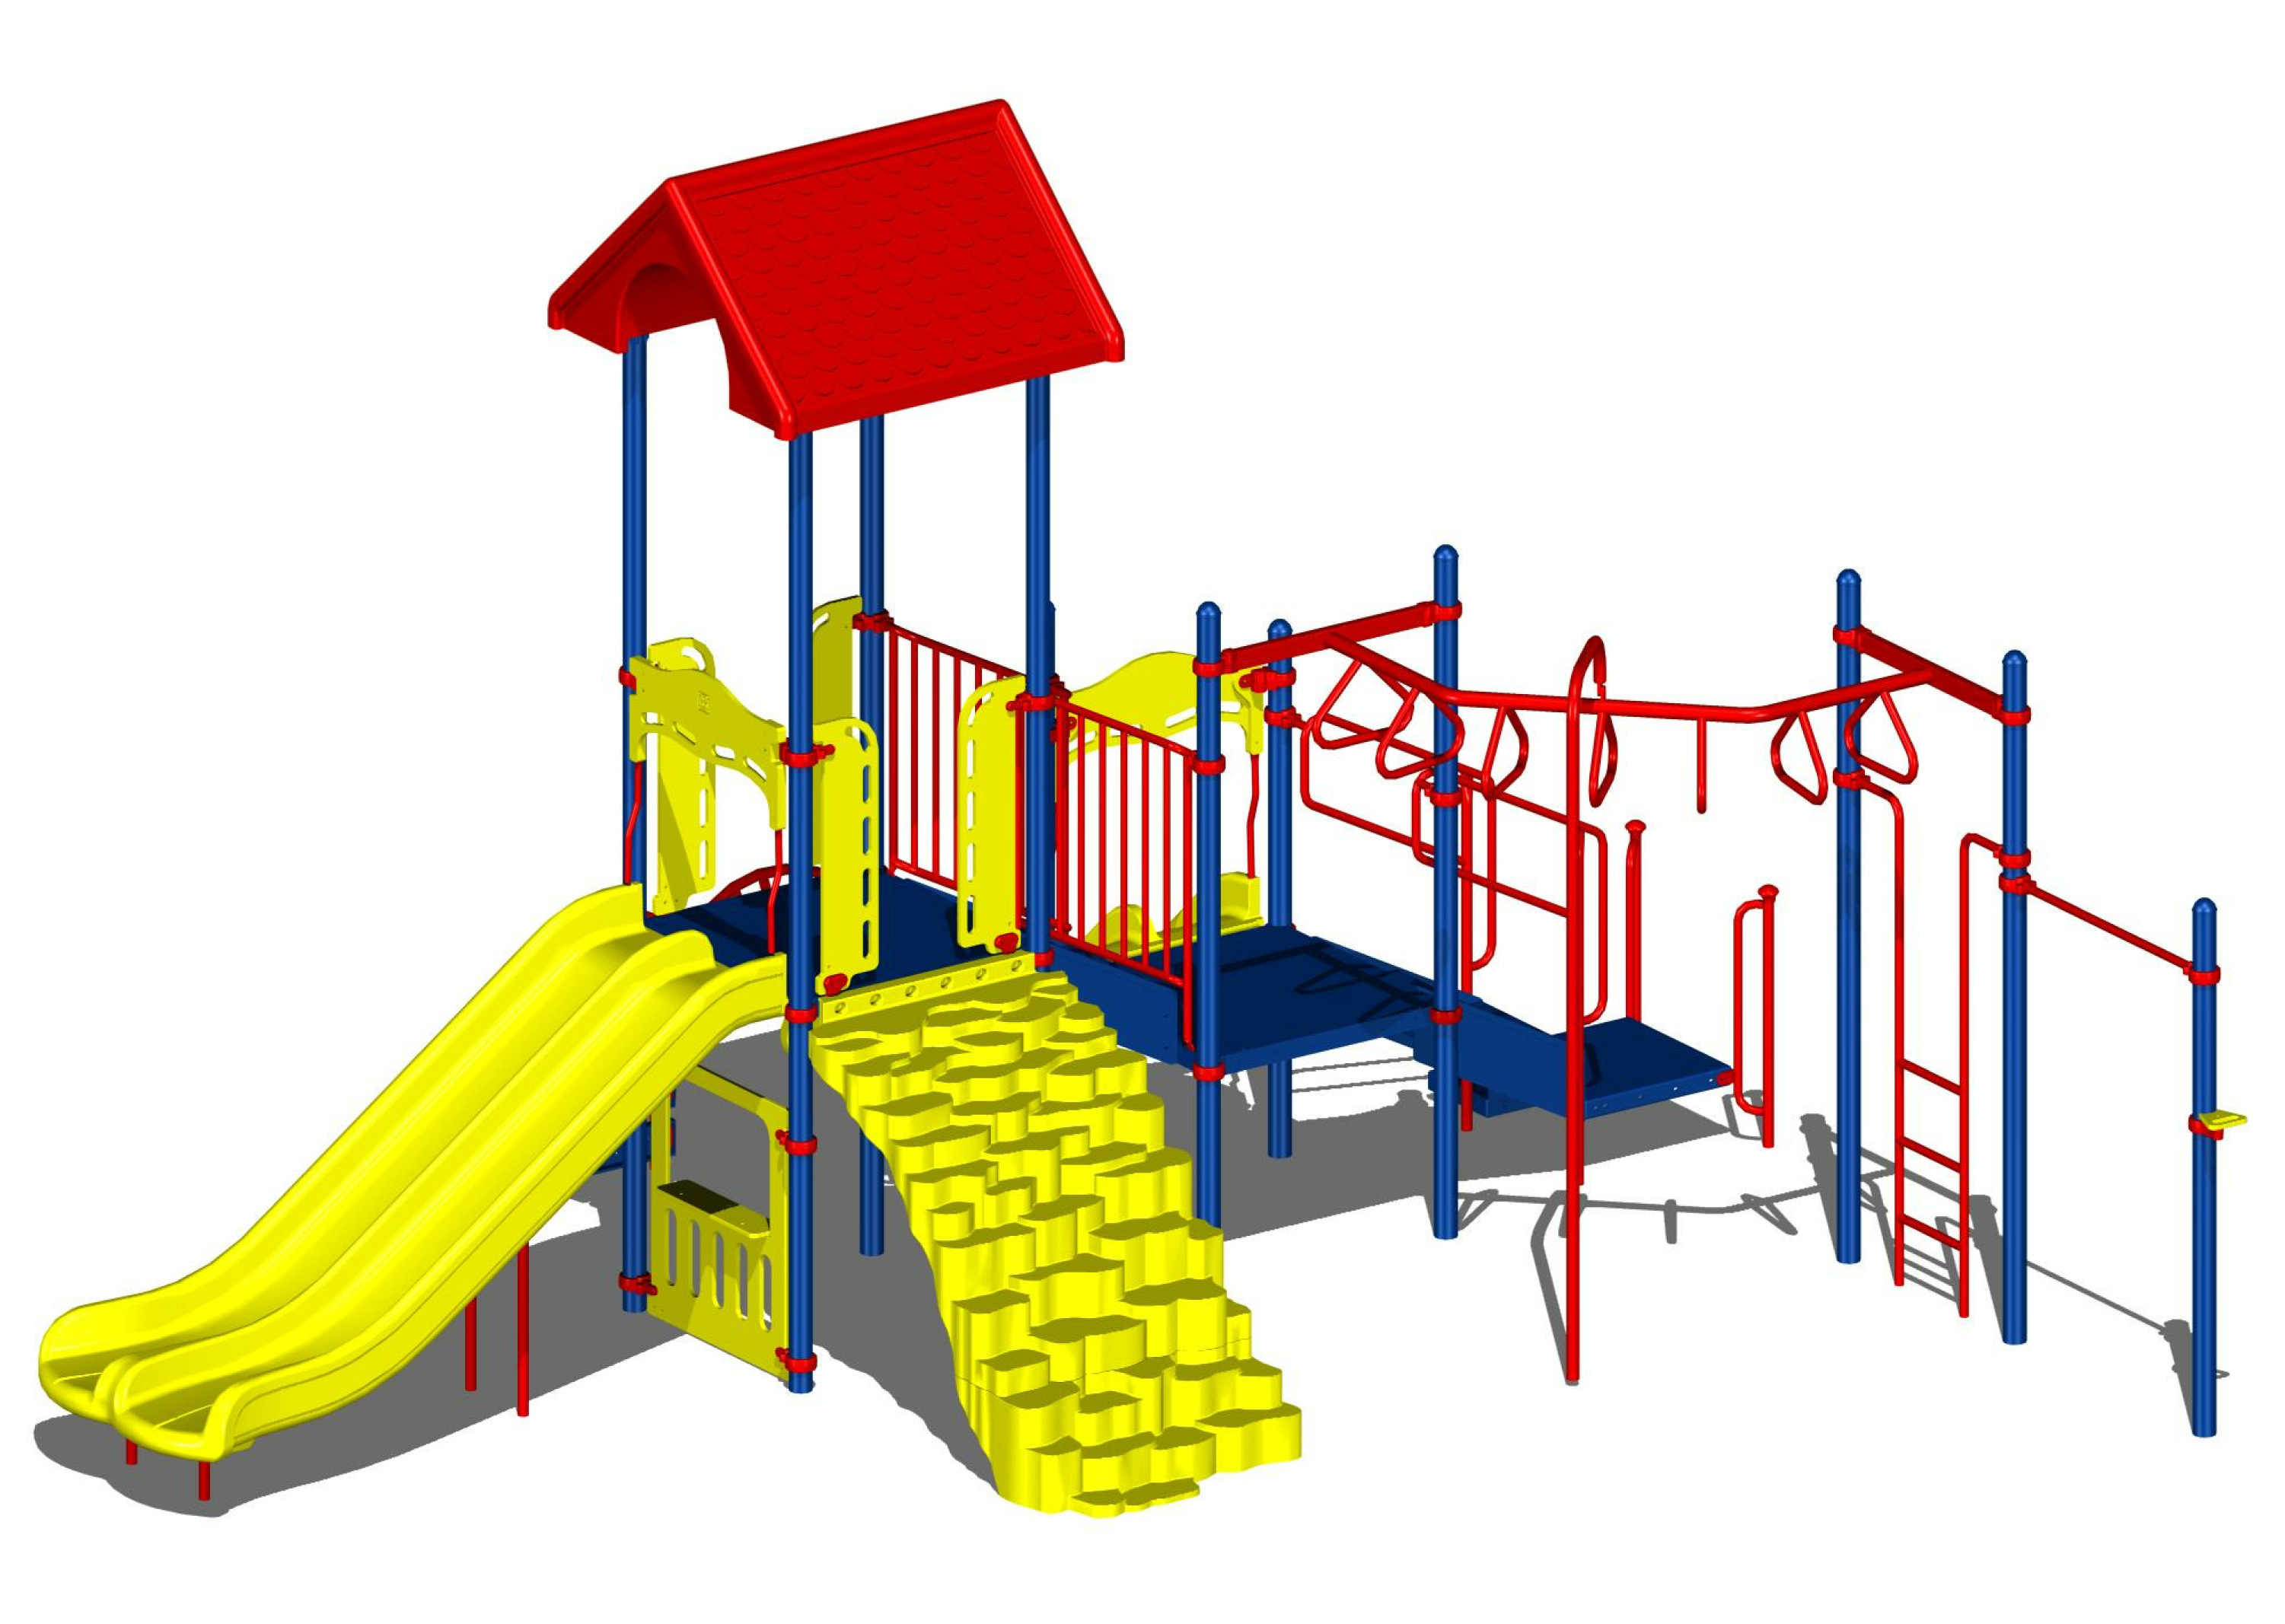 Pictures Of Playground Equipment | Free Download Clip Art | Free ...